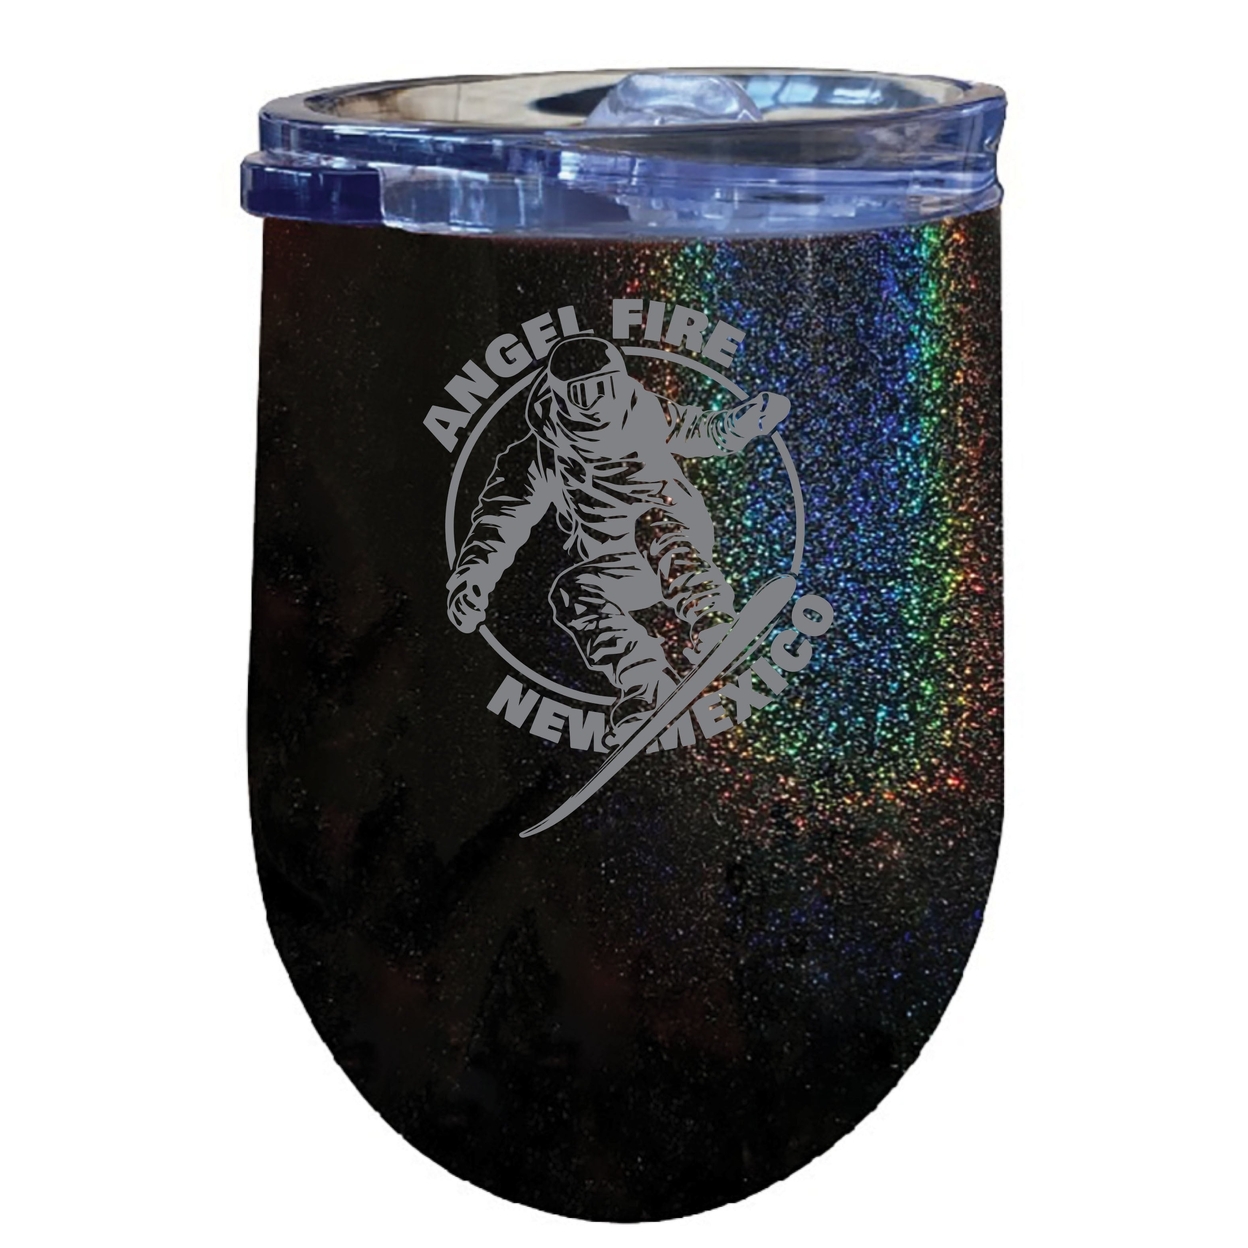 Angel Fire New Mexico Souvenir 12 Oz Engraved Insulated Wine Stainless Steel Tumbler - Rainbow Glitter Gray,,Single Unit